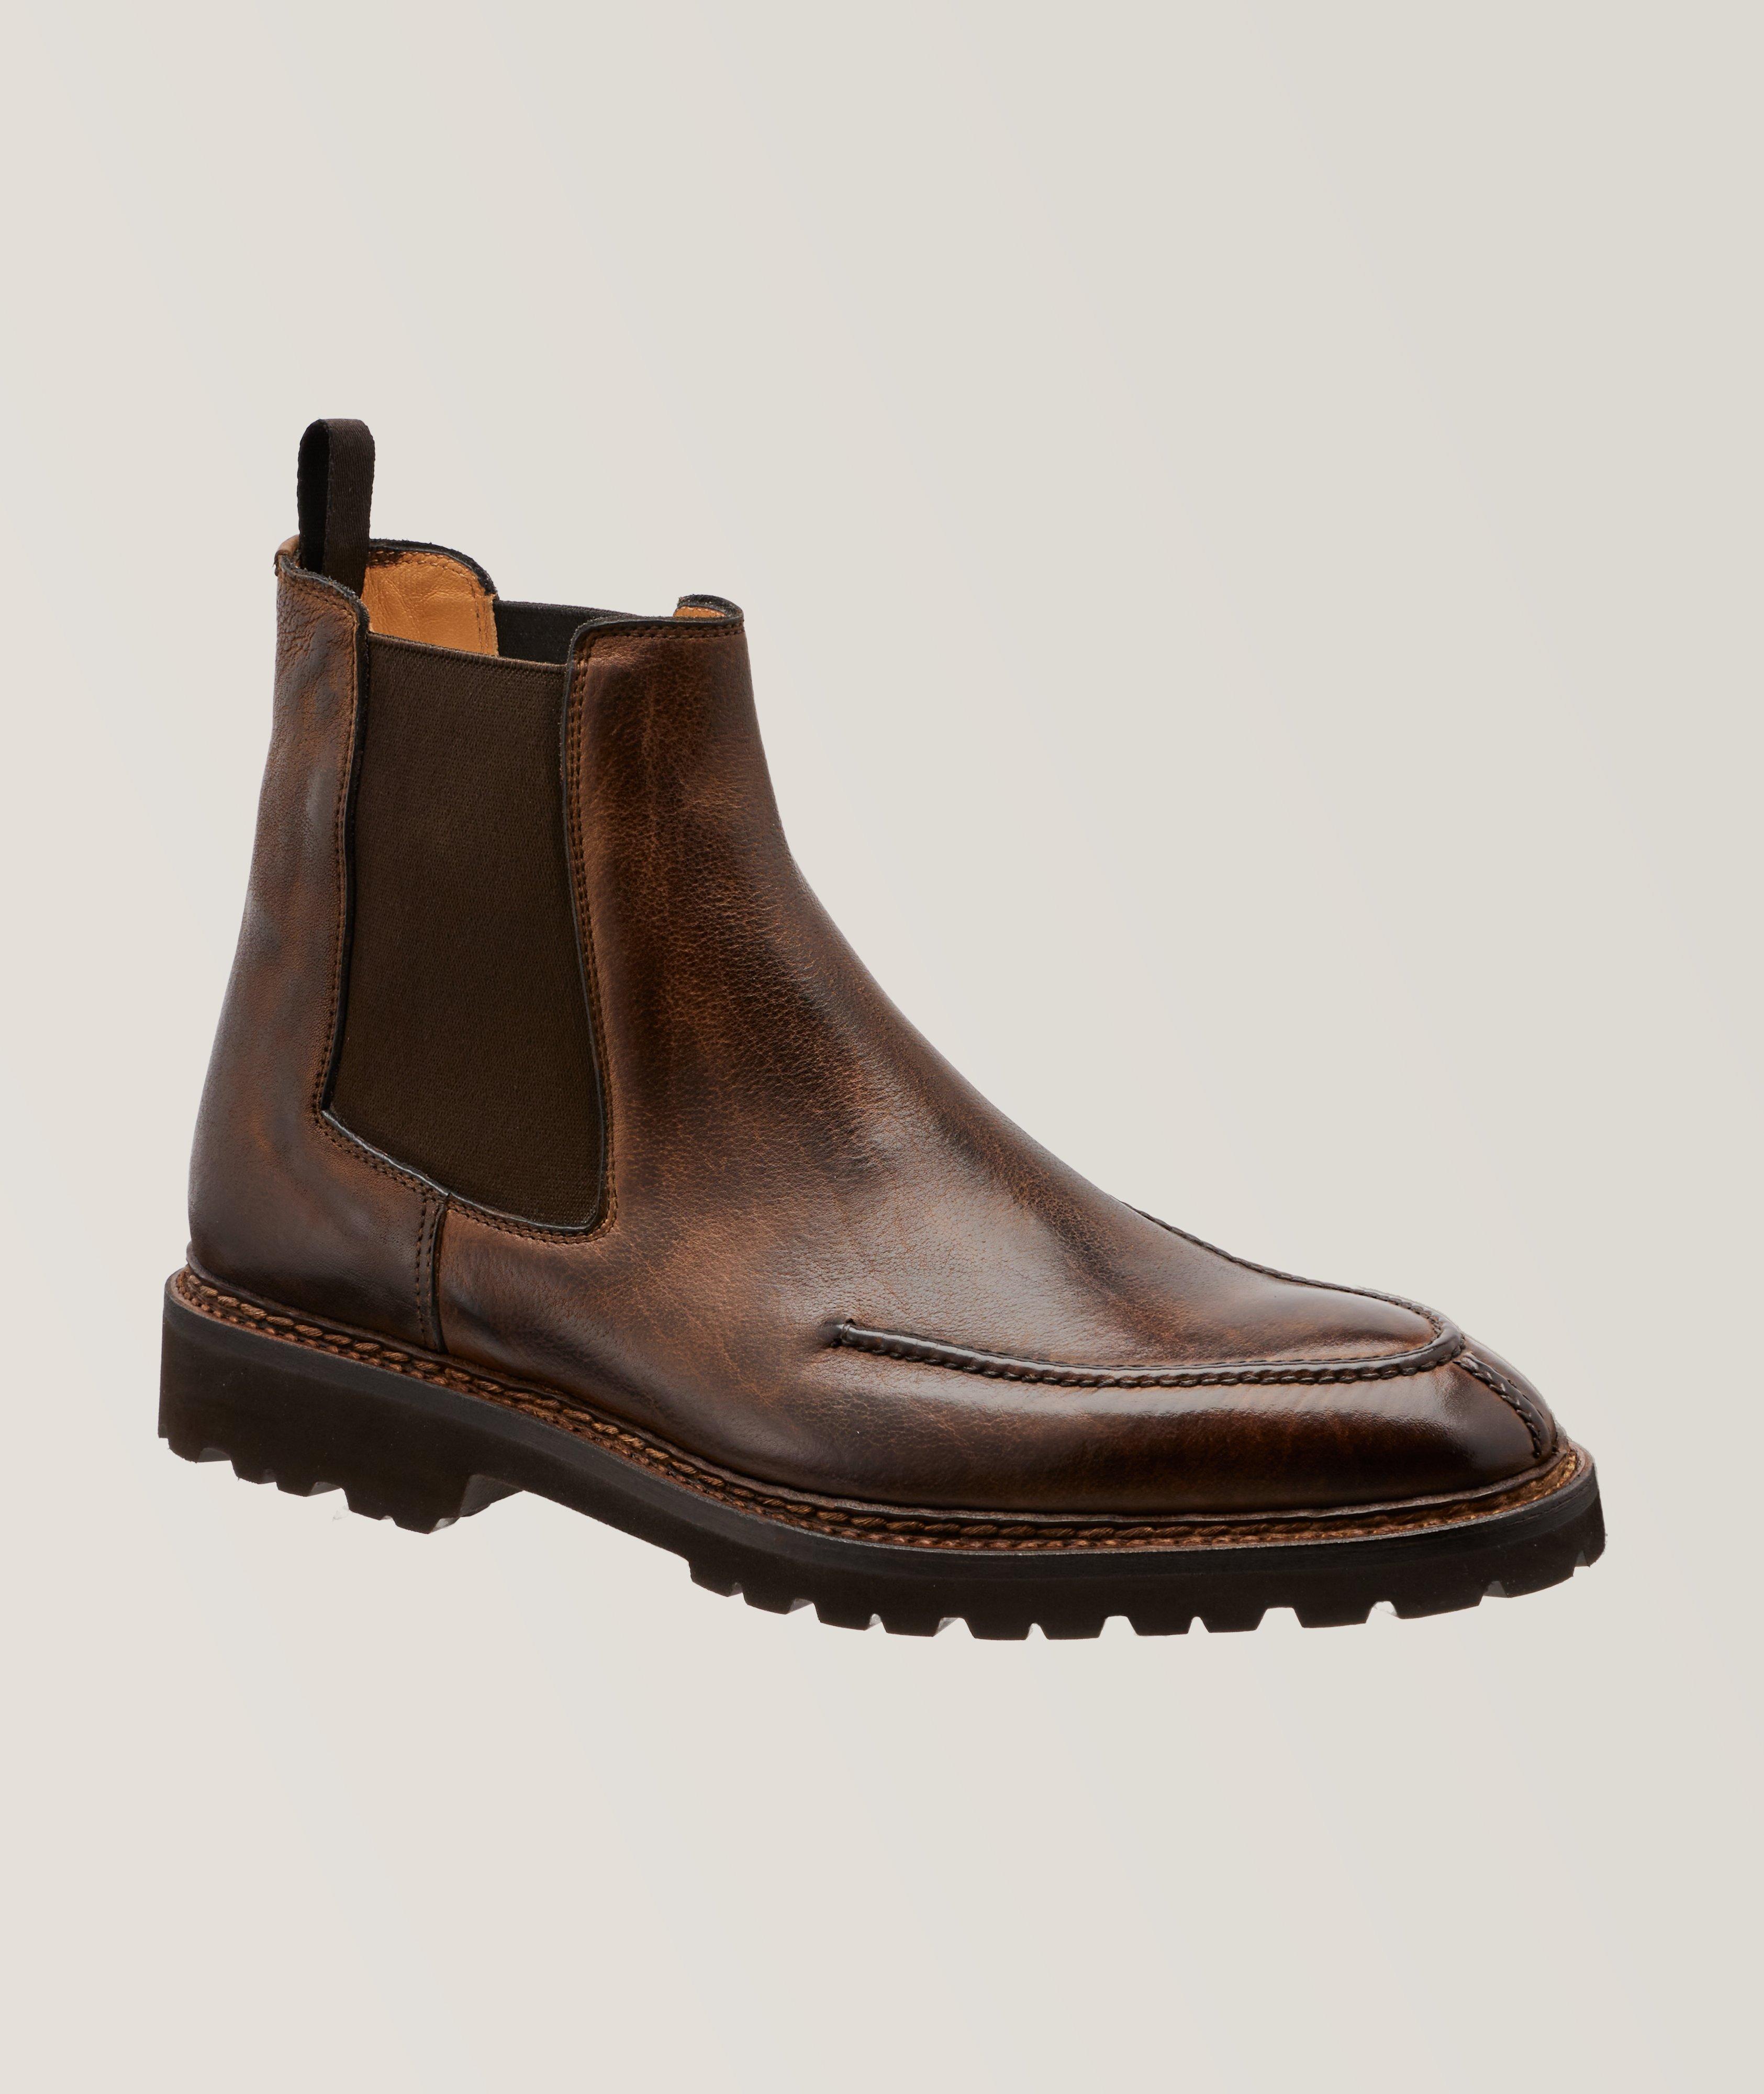 Cavaliere Leather Chelsea Boots image 0